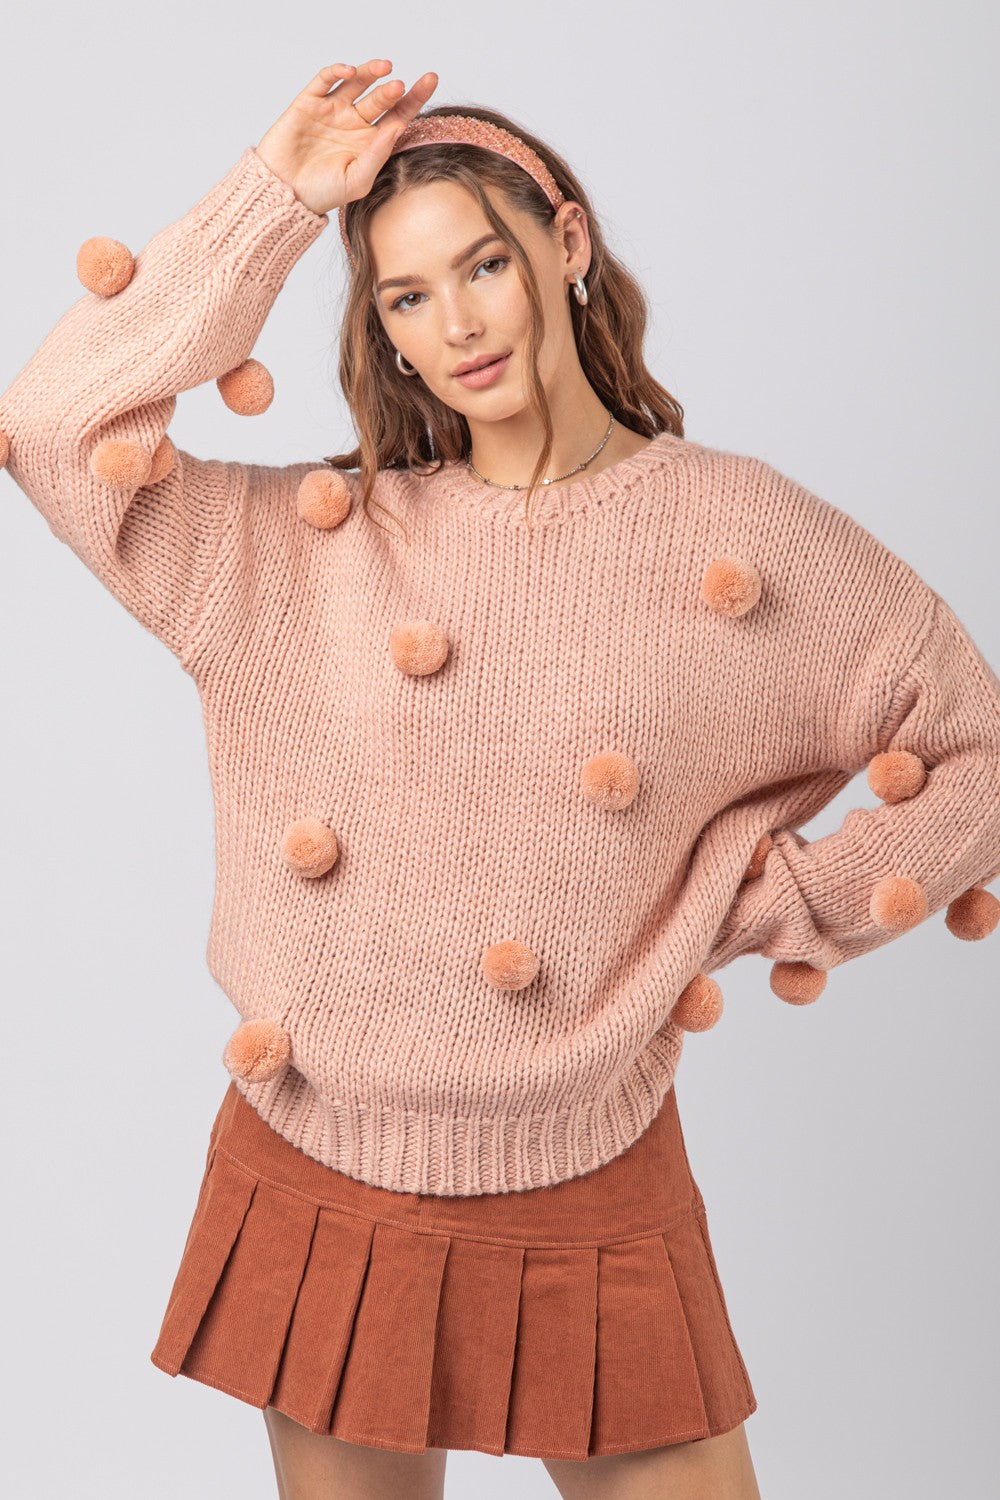 Flower Power Oversized Sweater - Cream, Pink and Orange, Small | Hazel and Olive | Boutique Fashion